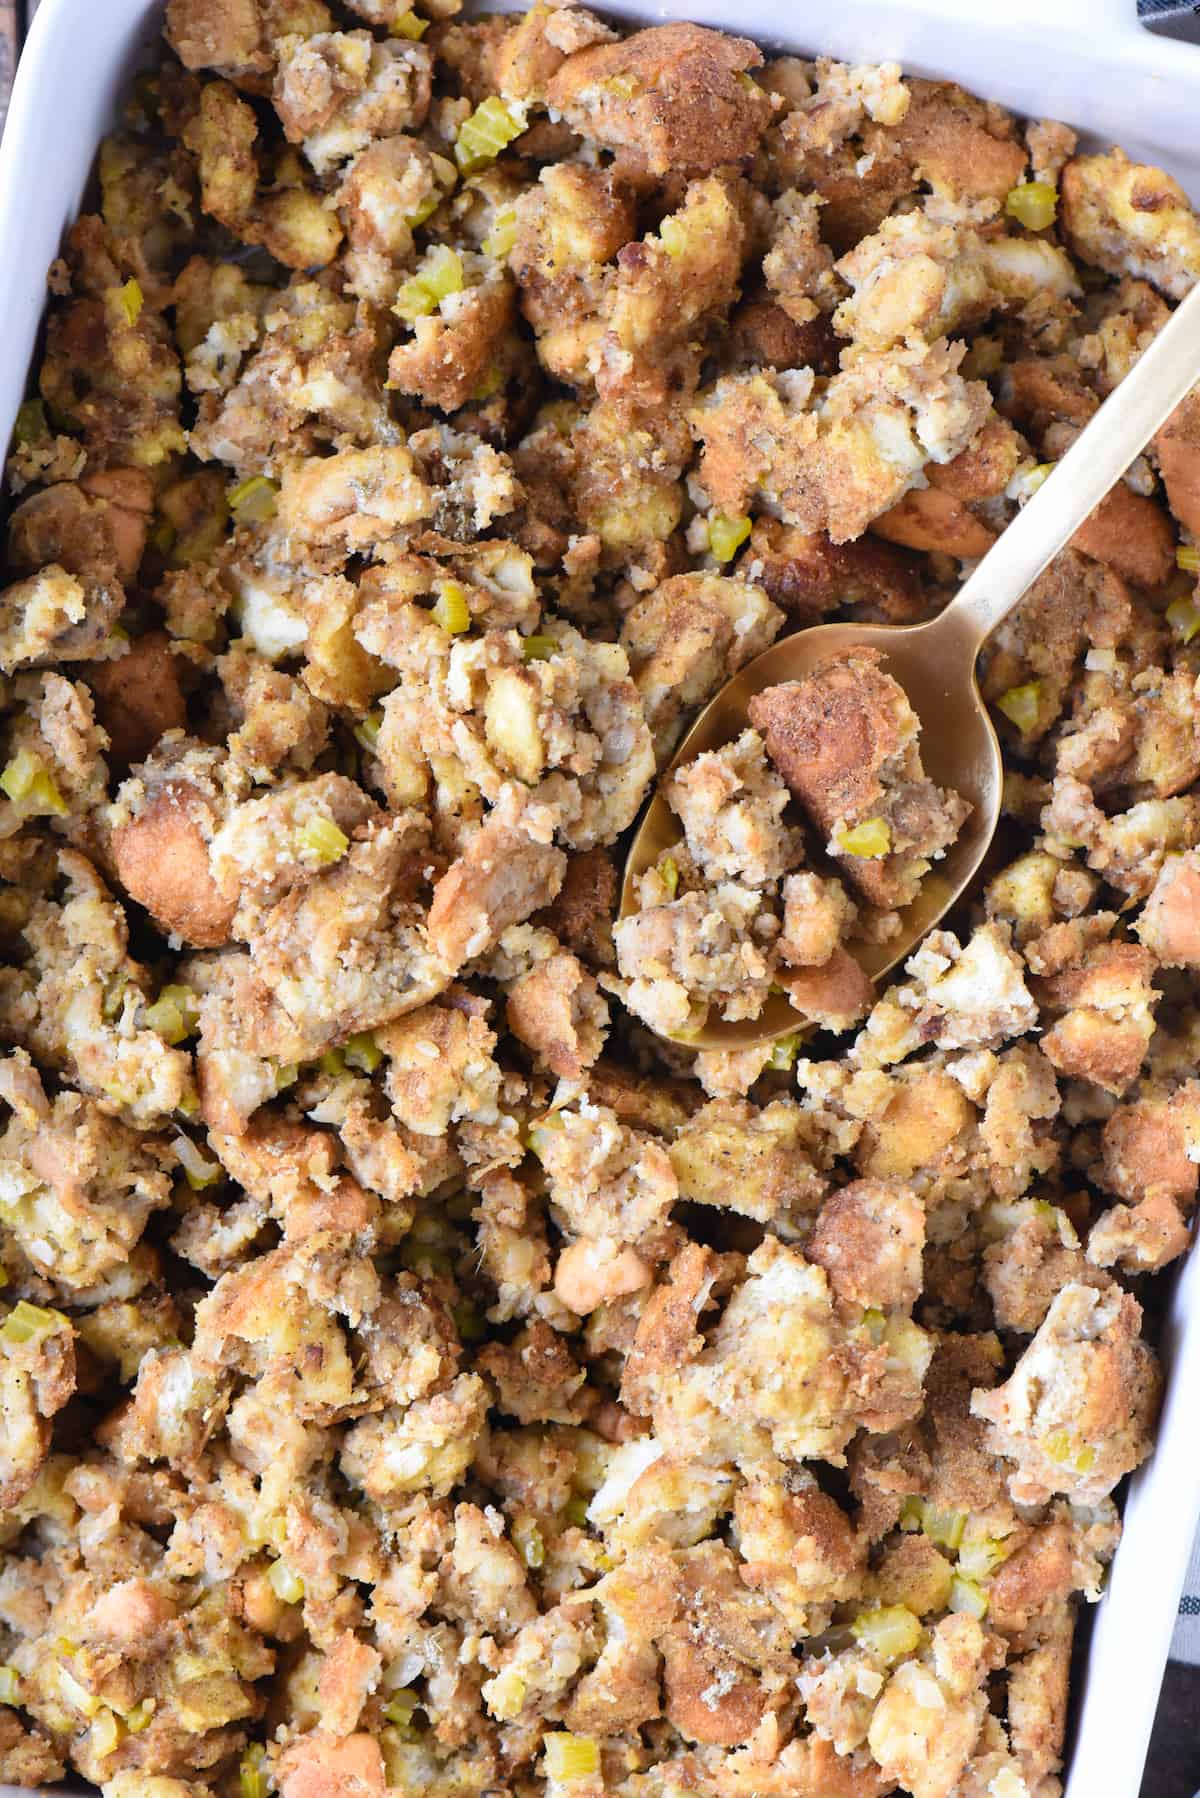 Closeup of baking dish of old fashioned bread stuffing with serving spoon.